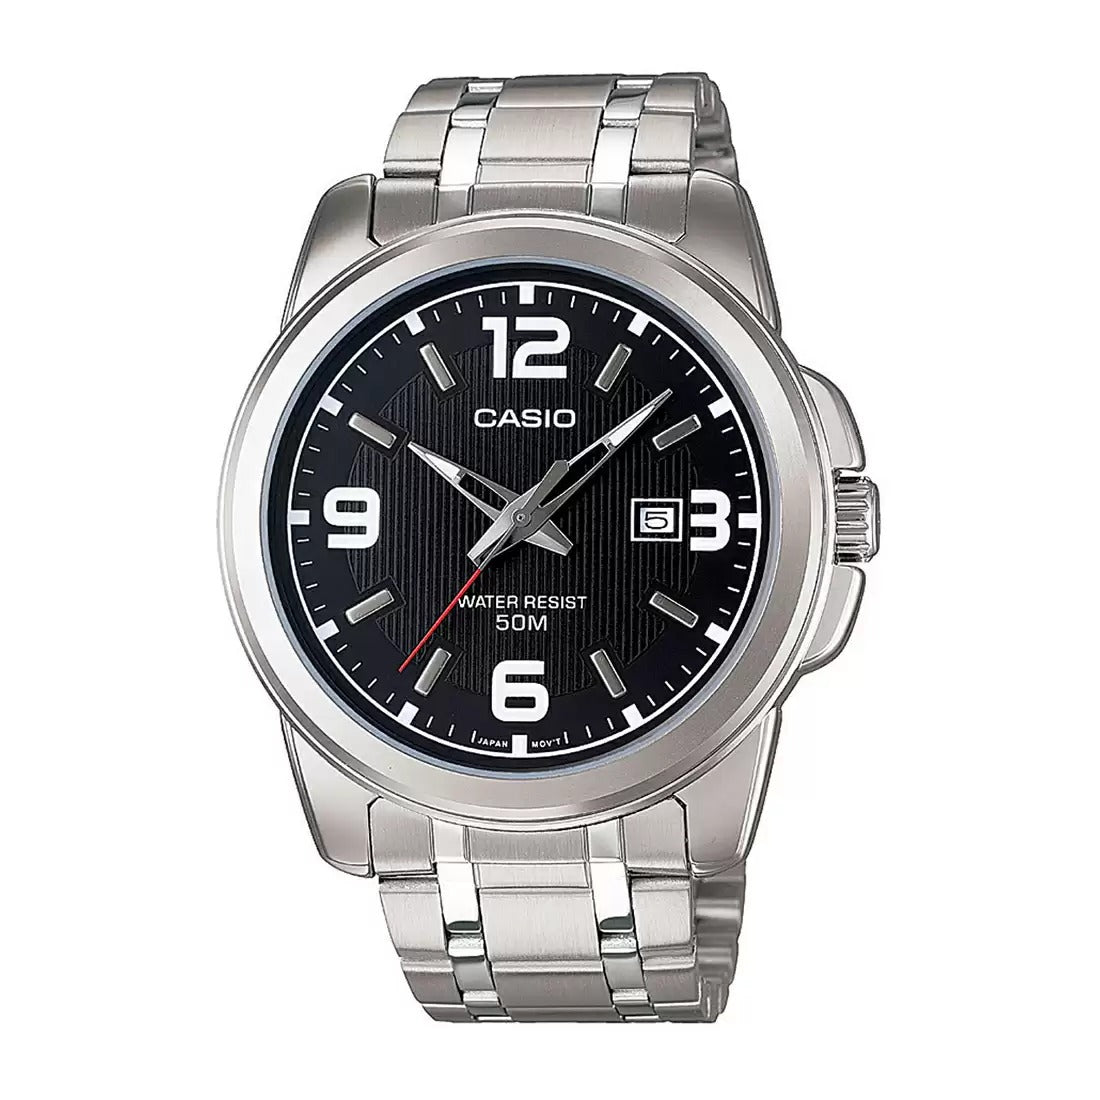 Casio Enticer Silver Analog Men's Watch A550 MTP-1314D-1AVDF